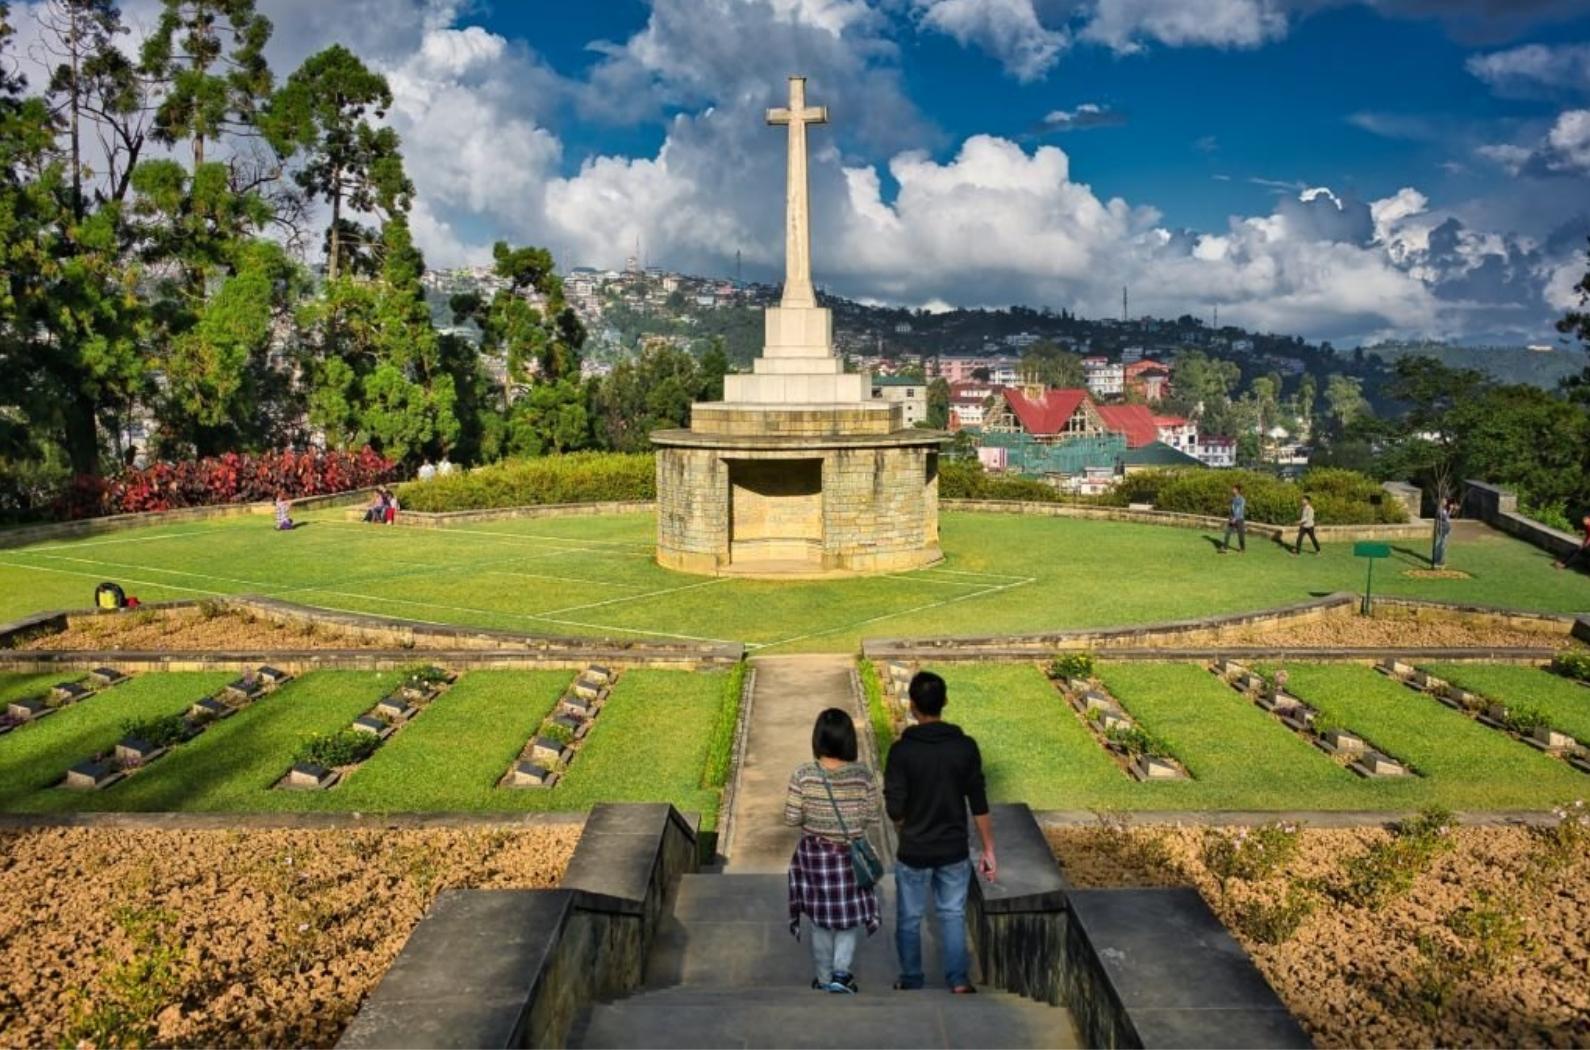 Two people in front of the big white cross of Kohima War Cemetery, while other people take photos and admire the cemetery on a sunny day, in Nagaland region, in Seven Sisters of India.